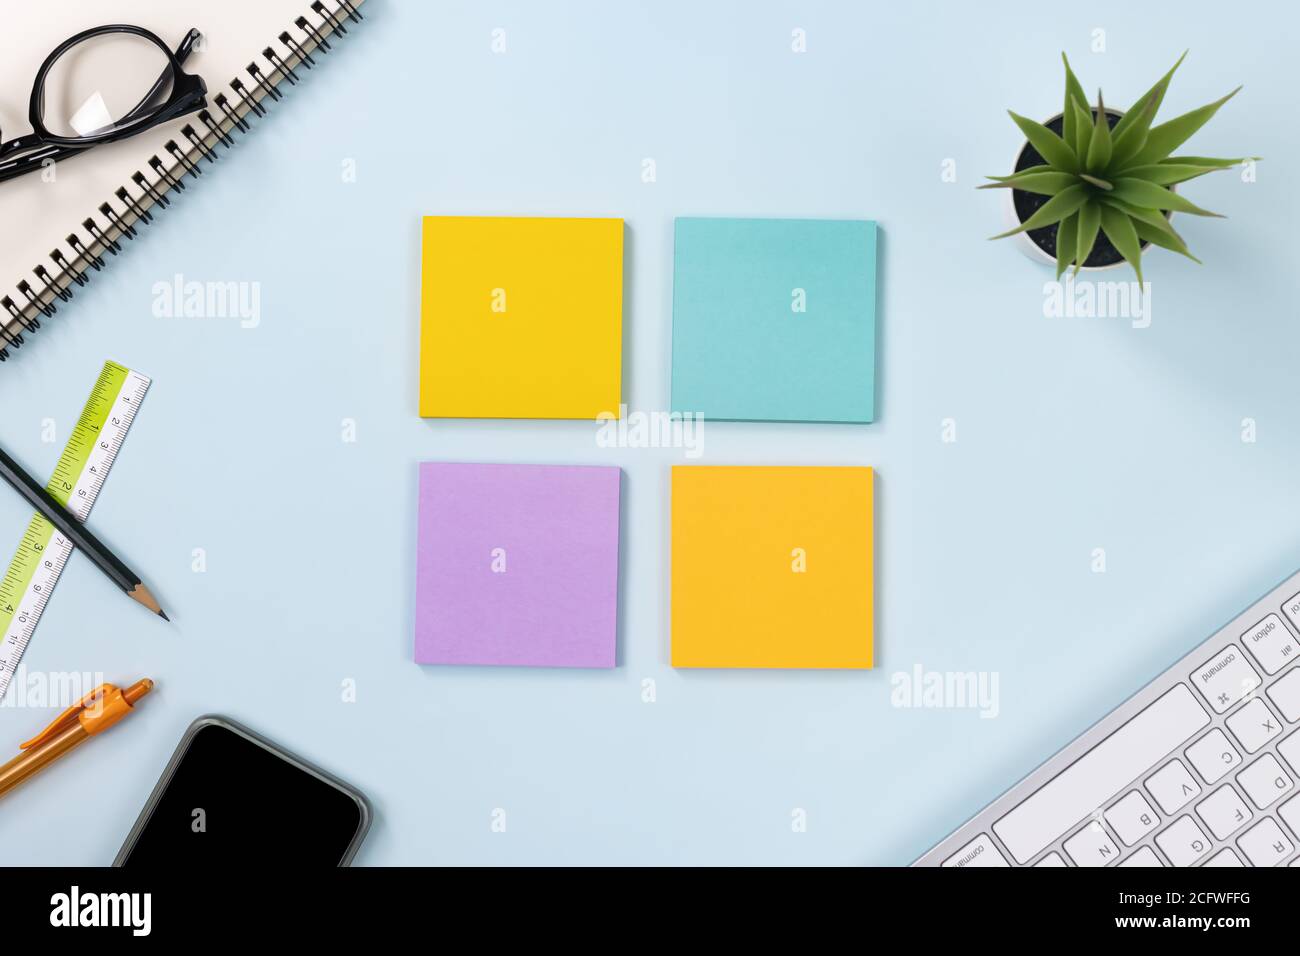 4 Sticky Note or Note Pad and Office Supplies as Keyboard,Pen,Pencil,Office Plants,Spiral Notebook,Glasses,Ruler,Mobile Phone on Modern Clean Creative Stock Photo